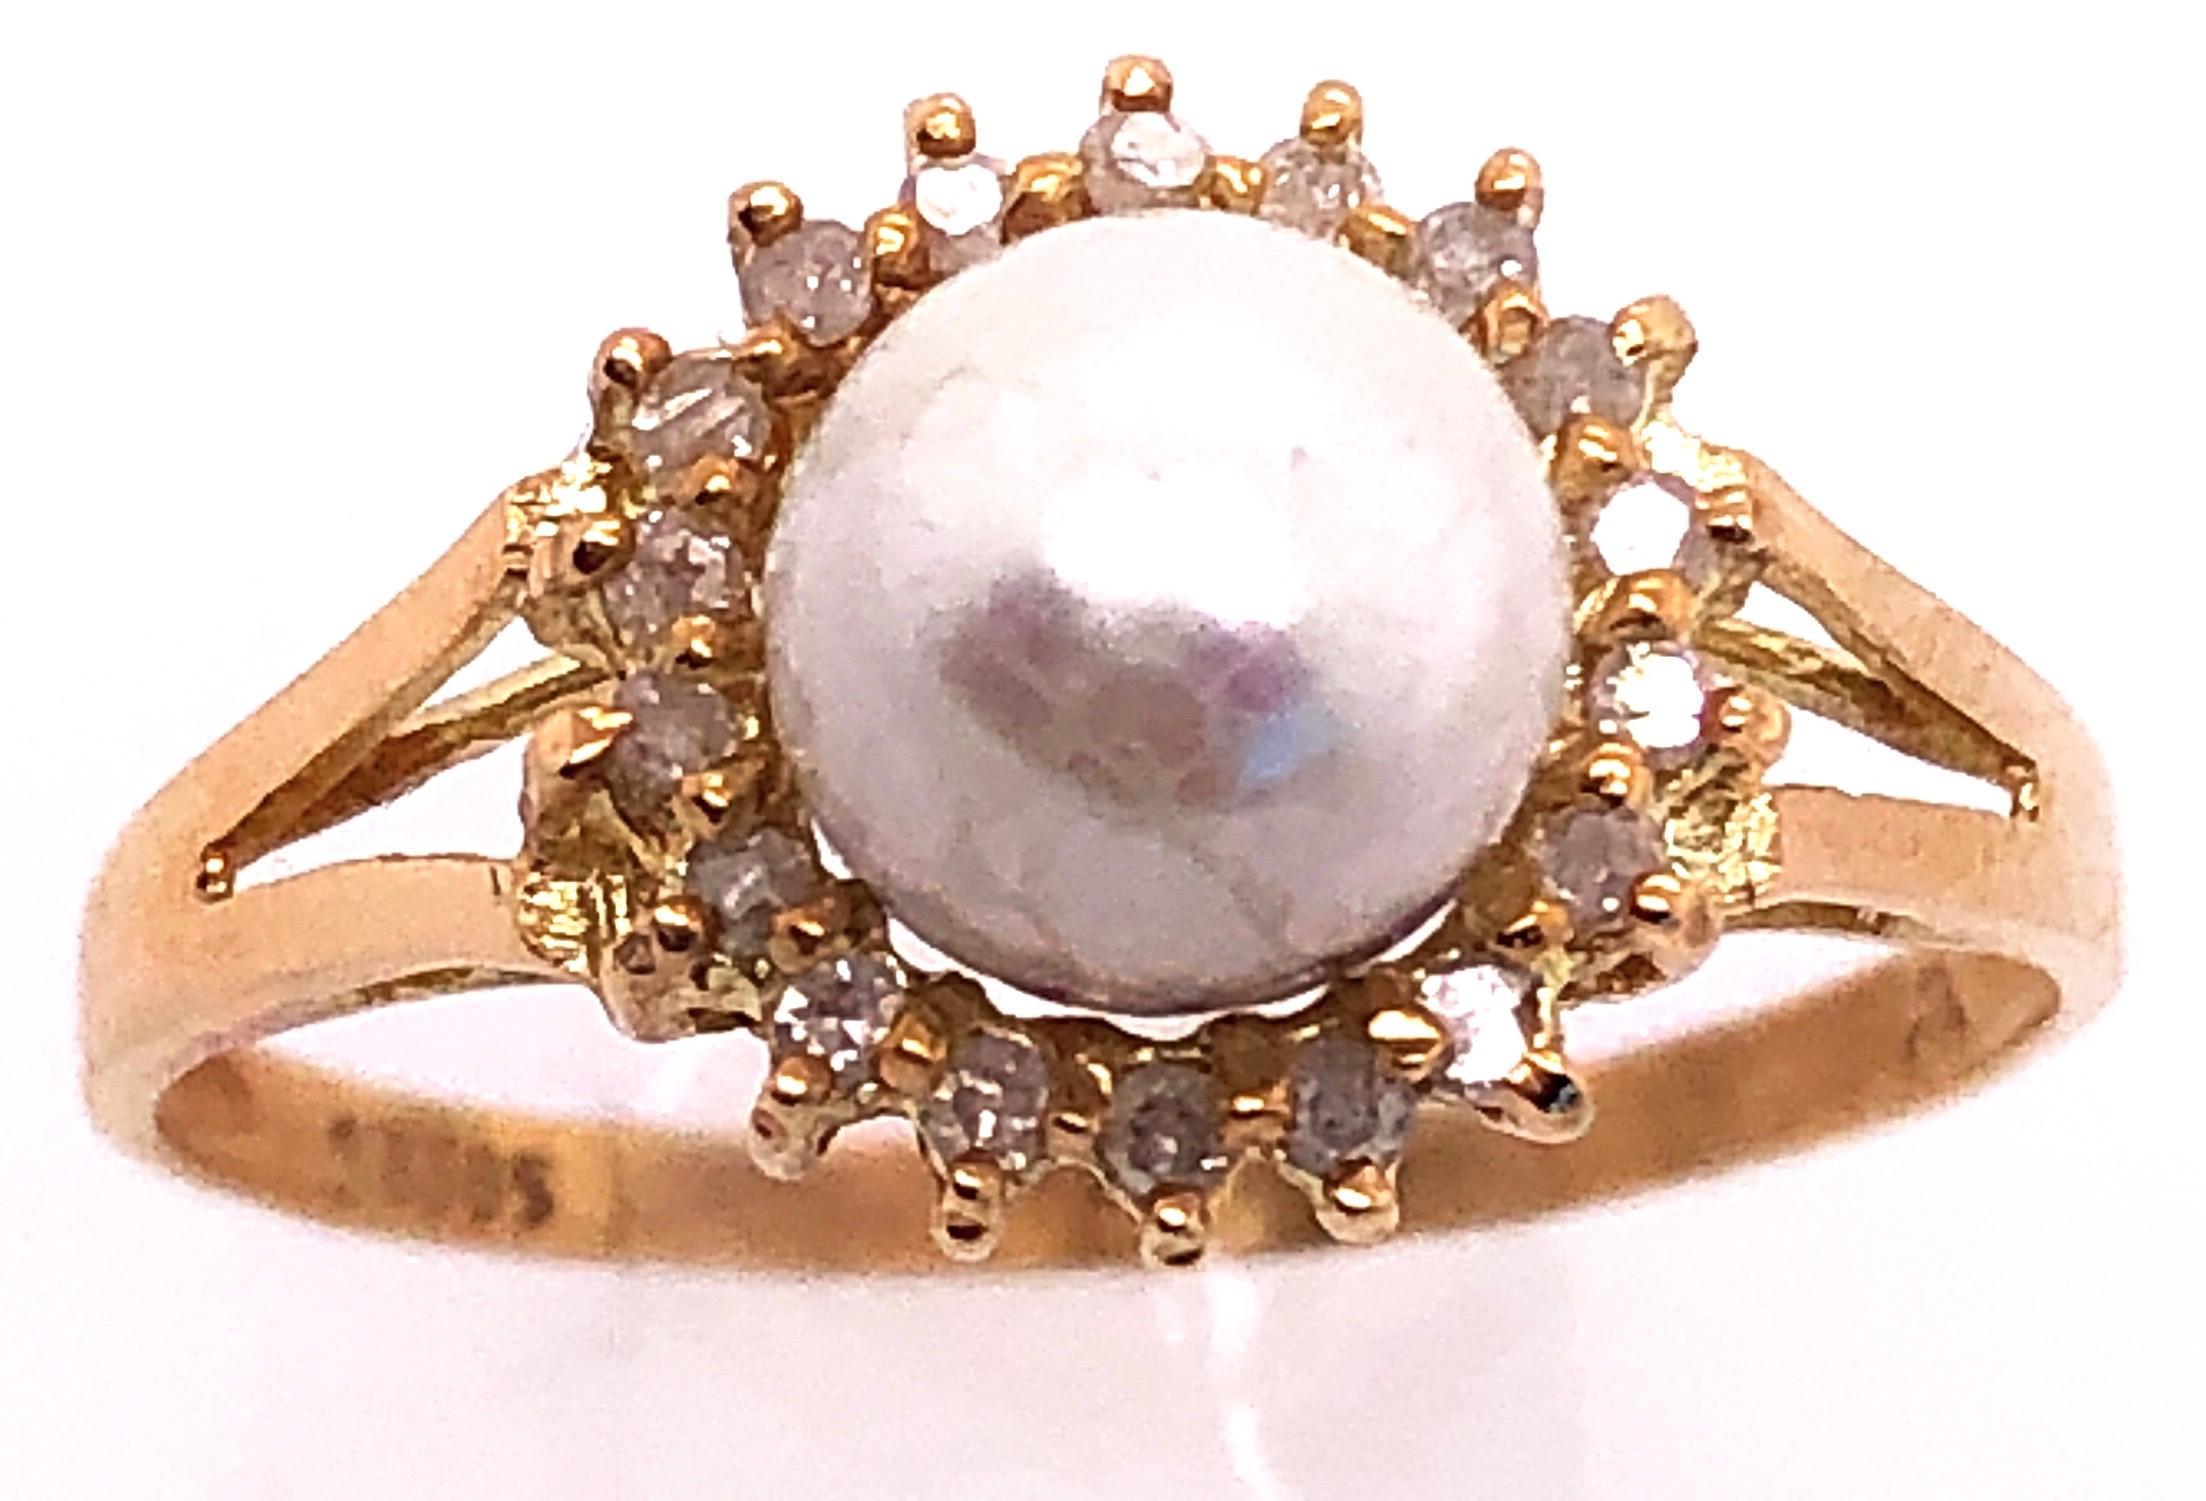 14 Karat Yellow Gold Fashion Pearl Ring with Diamonds Size 8.5
6 mm diameter pearl
2.4 grams total weight.